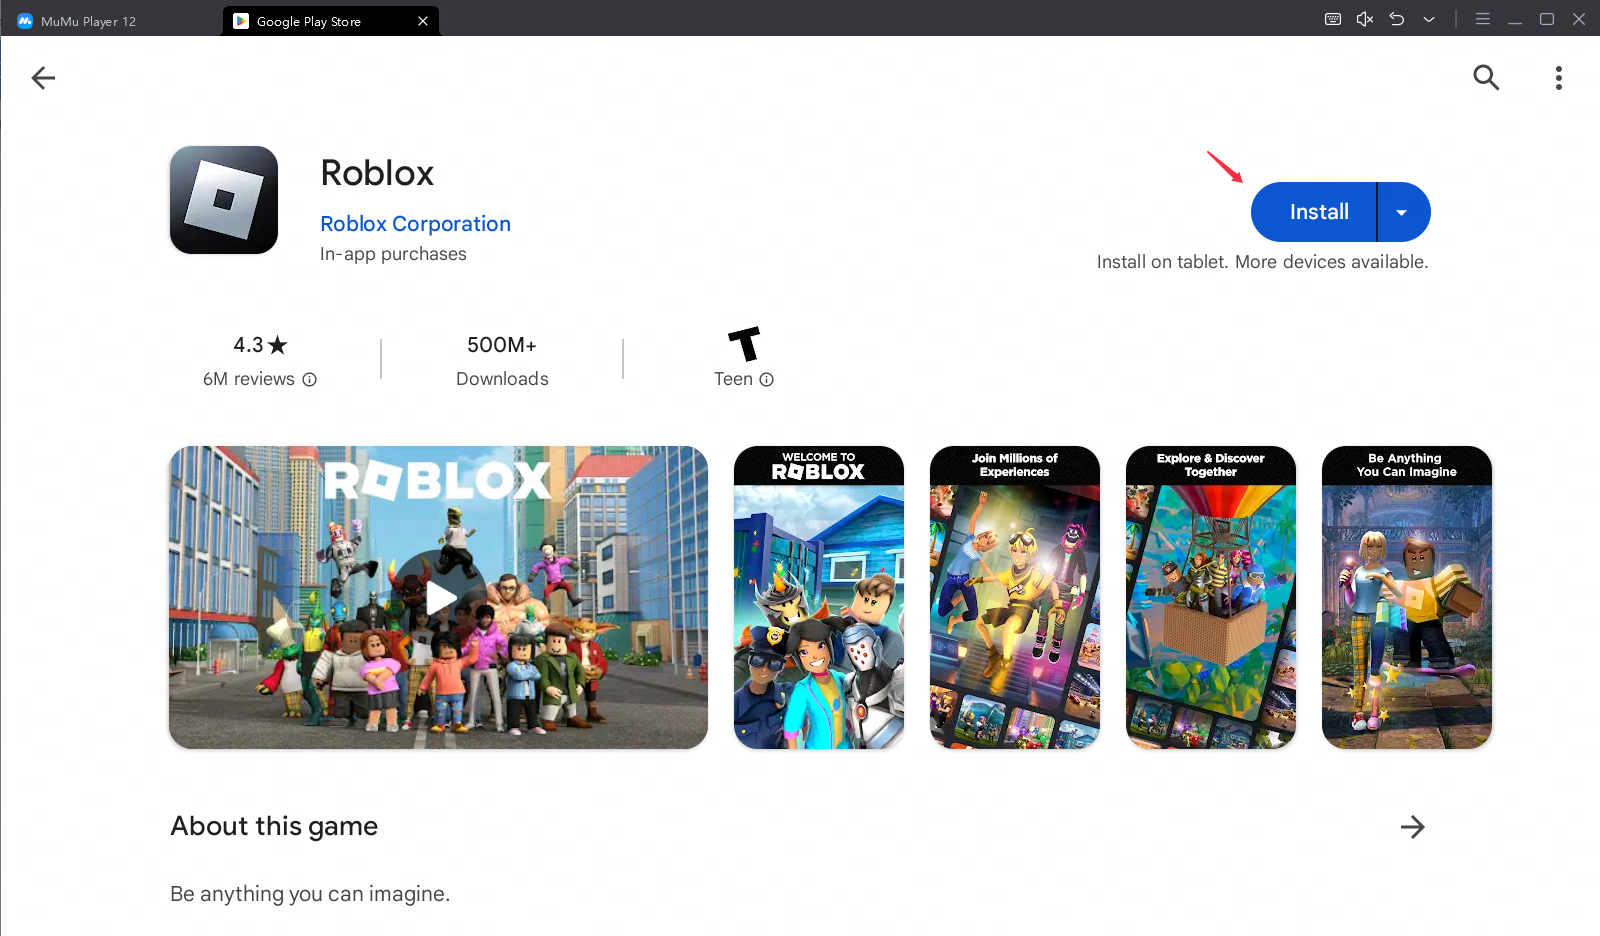 How to play Roblox on PC with MuMu Player 12